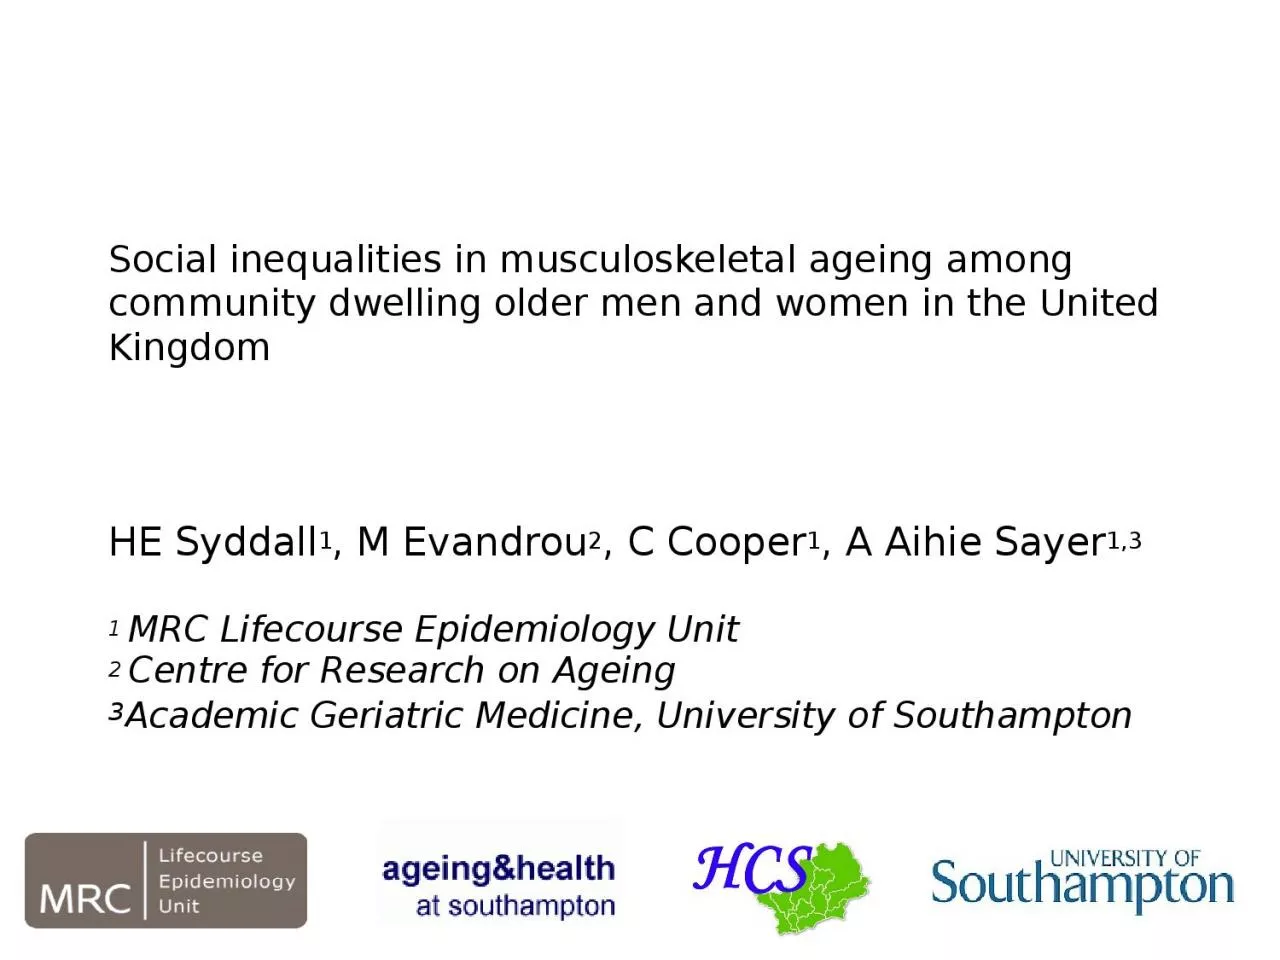 Social inequalities in musculoskeletal ageing among community dwelling older men and women